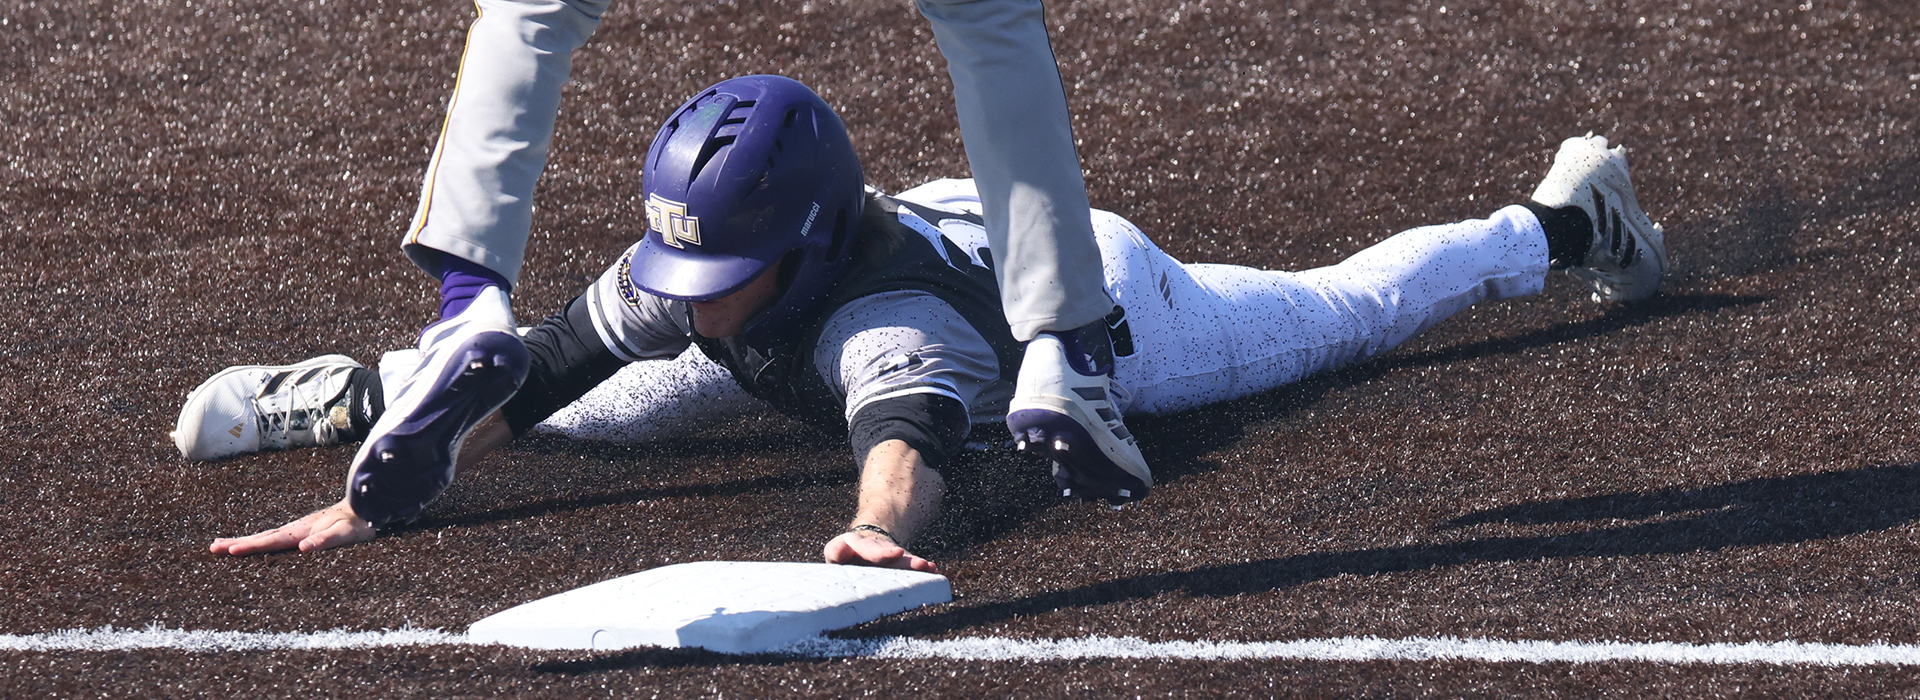 Purple and gold line up weekend series with longtime OVC rival Morehead State